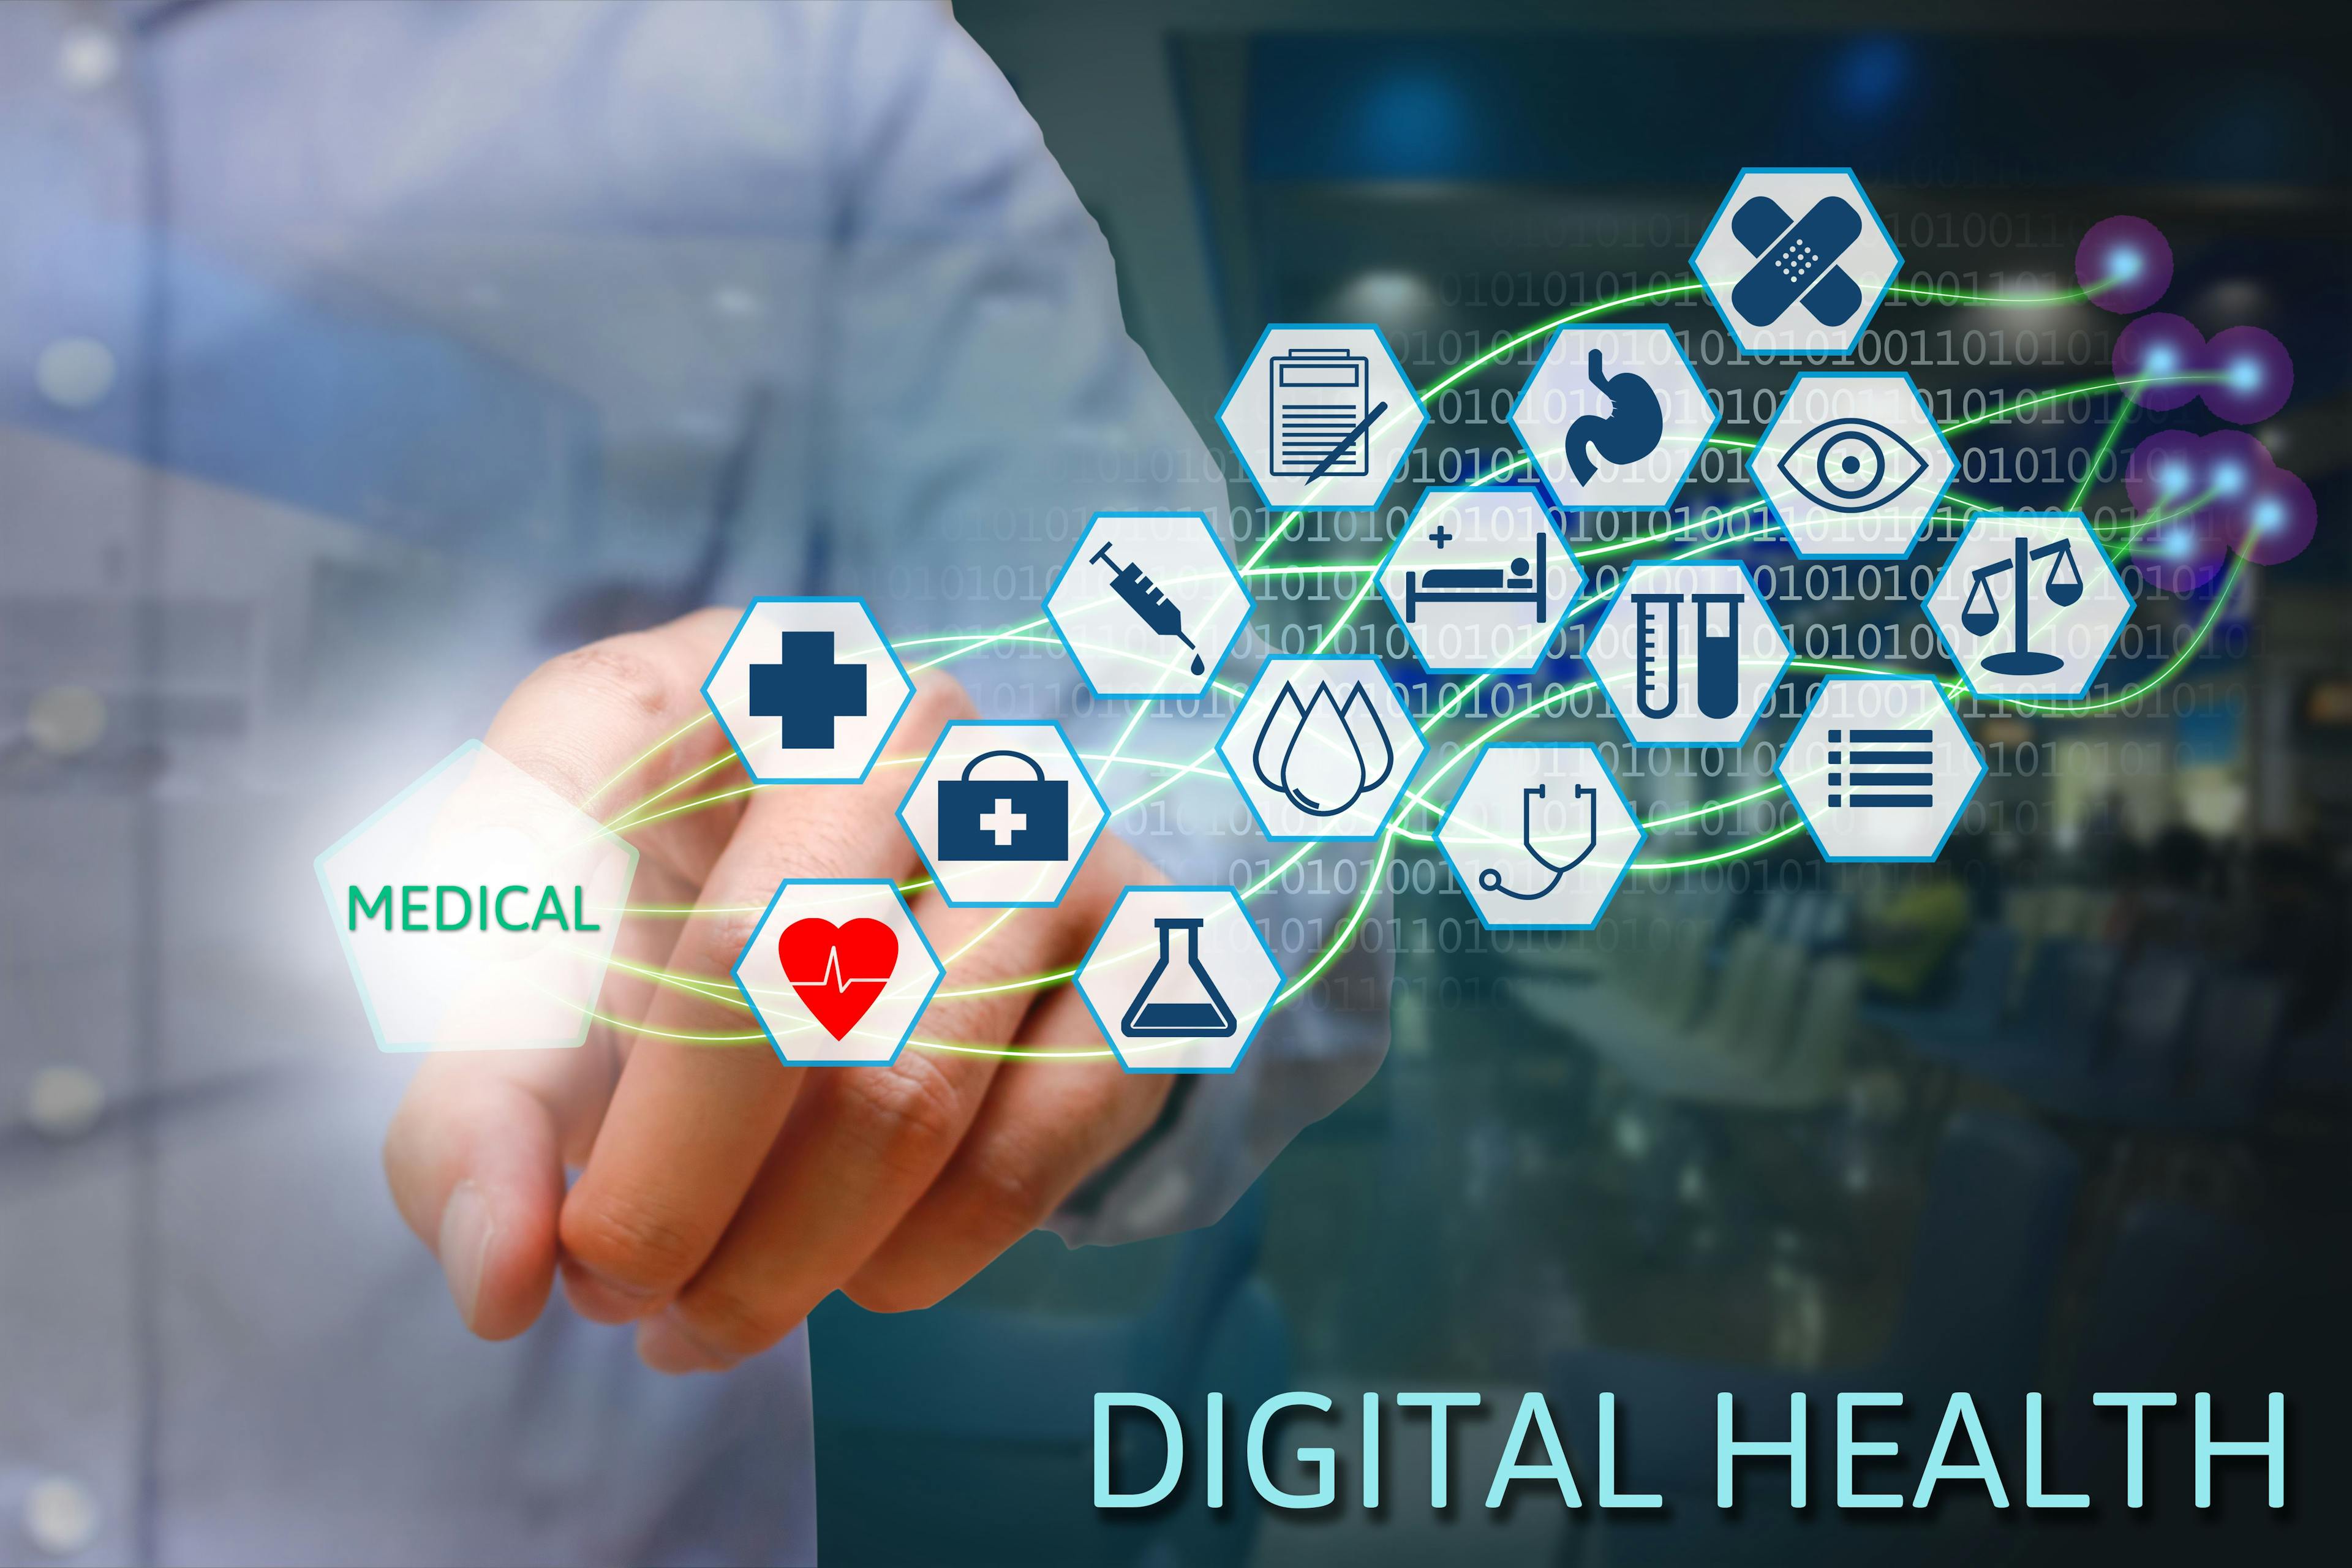 New Digital Therapeutics Guide Aims to Bring High Standards, Clarity